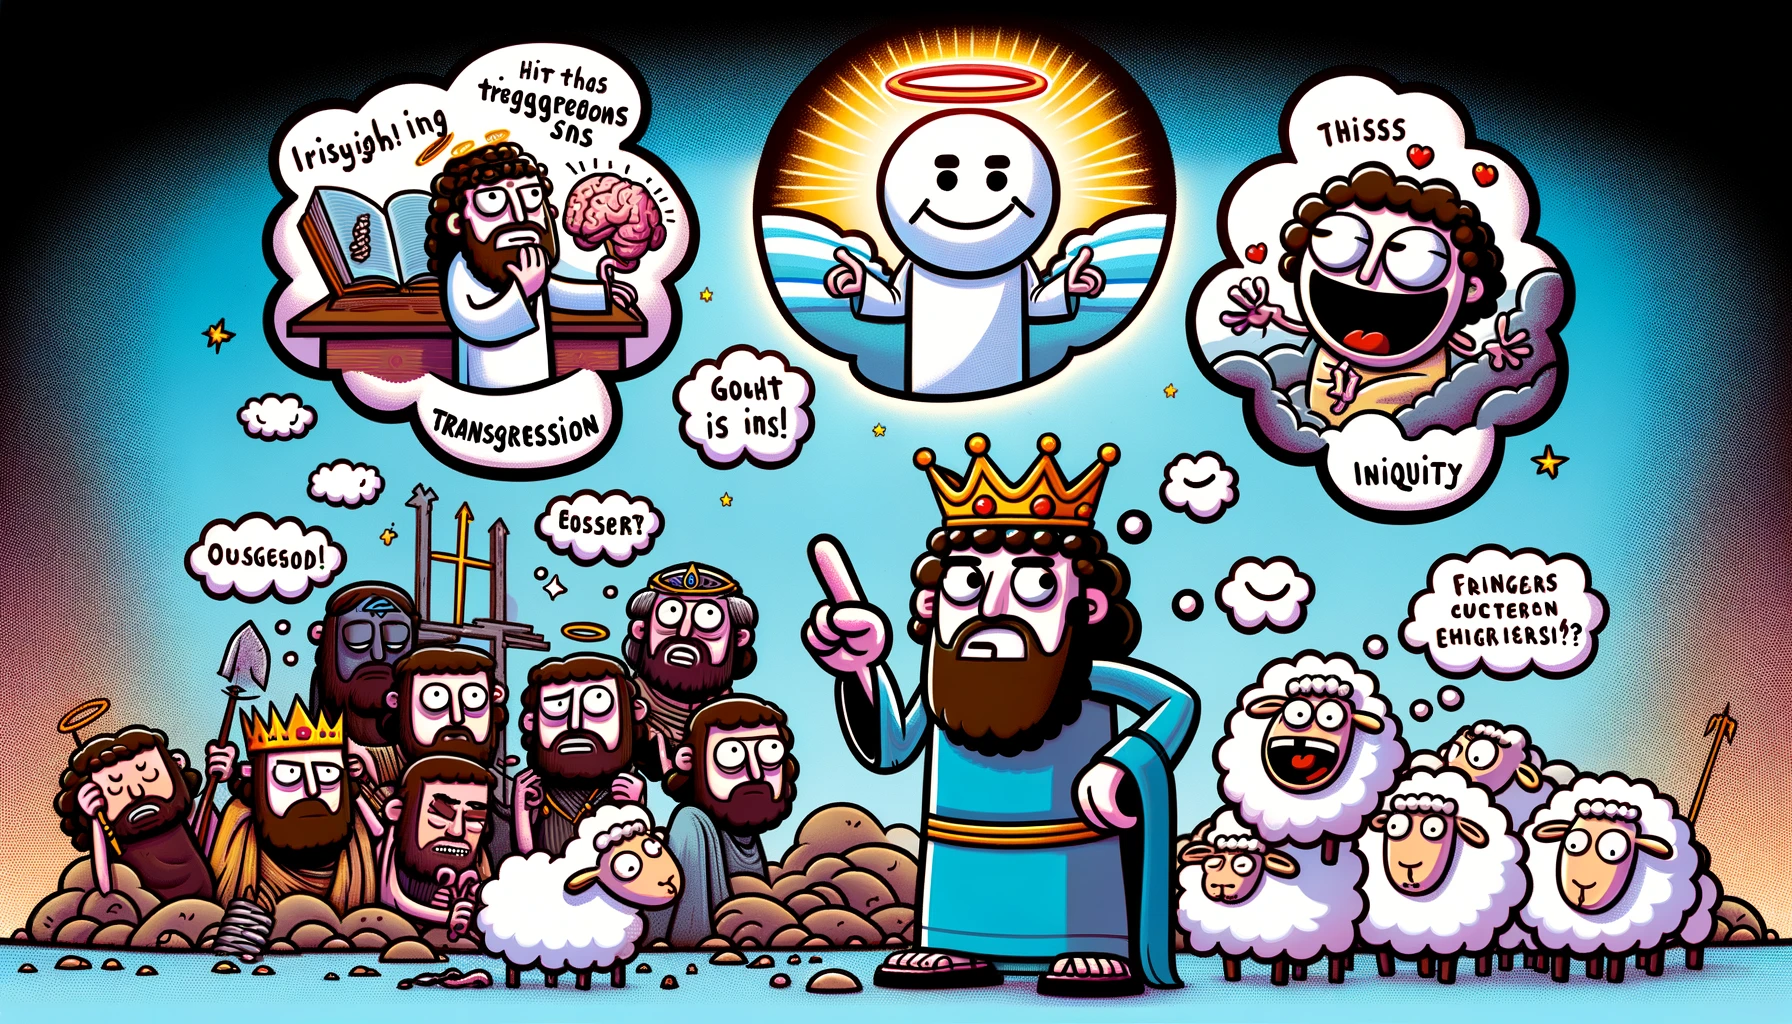 A comical graphic summarizing the concepts of sin, transgression, and iniquity in a biblical context. The graphic features a cartoon King David with a thought bubble showing his famous sins, such as his affair with Bathsheba and the orchestration of Uriah's death. Above David, a divine light shines with a smiley face symbolizing God's forgiveness. In the background, playful illustrations of sheep with exaggerated expressions represent the wayward nature of humanity. The style should be light-hearted and colorful, with a touch of humor to convey the seriousness of the message in a fun way.